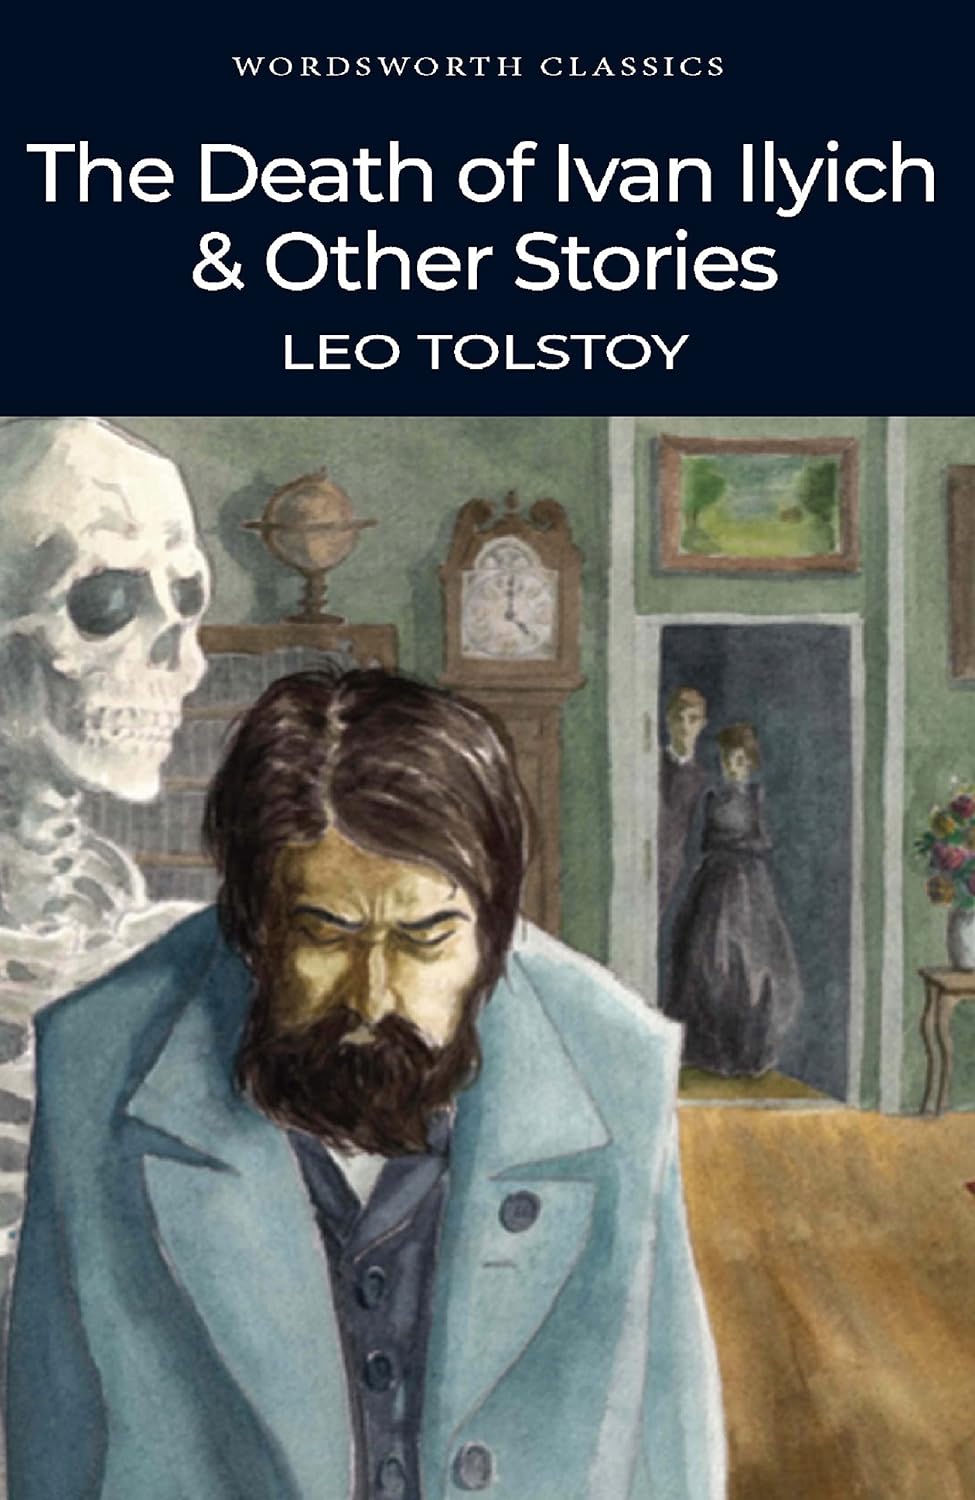 Sách Ngoại Văn - The Death of Ivan Ilyich and Other Stories (Wordsworth Classics) by Leo Tolstoy (Author)